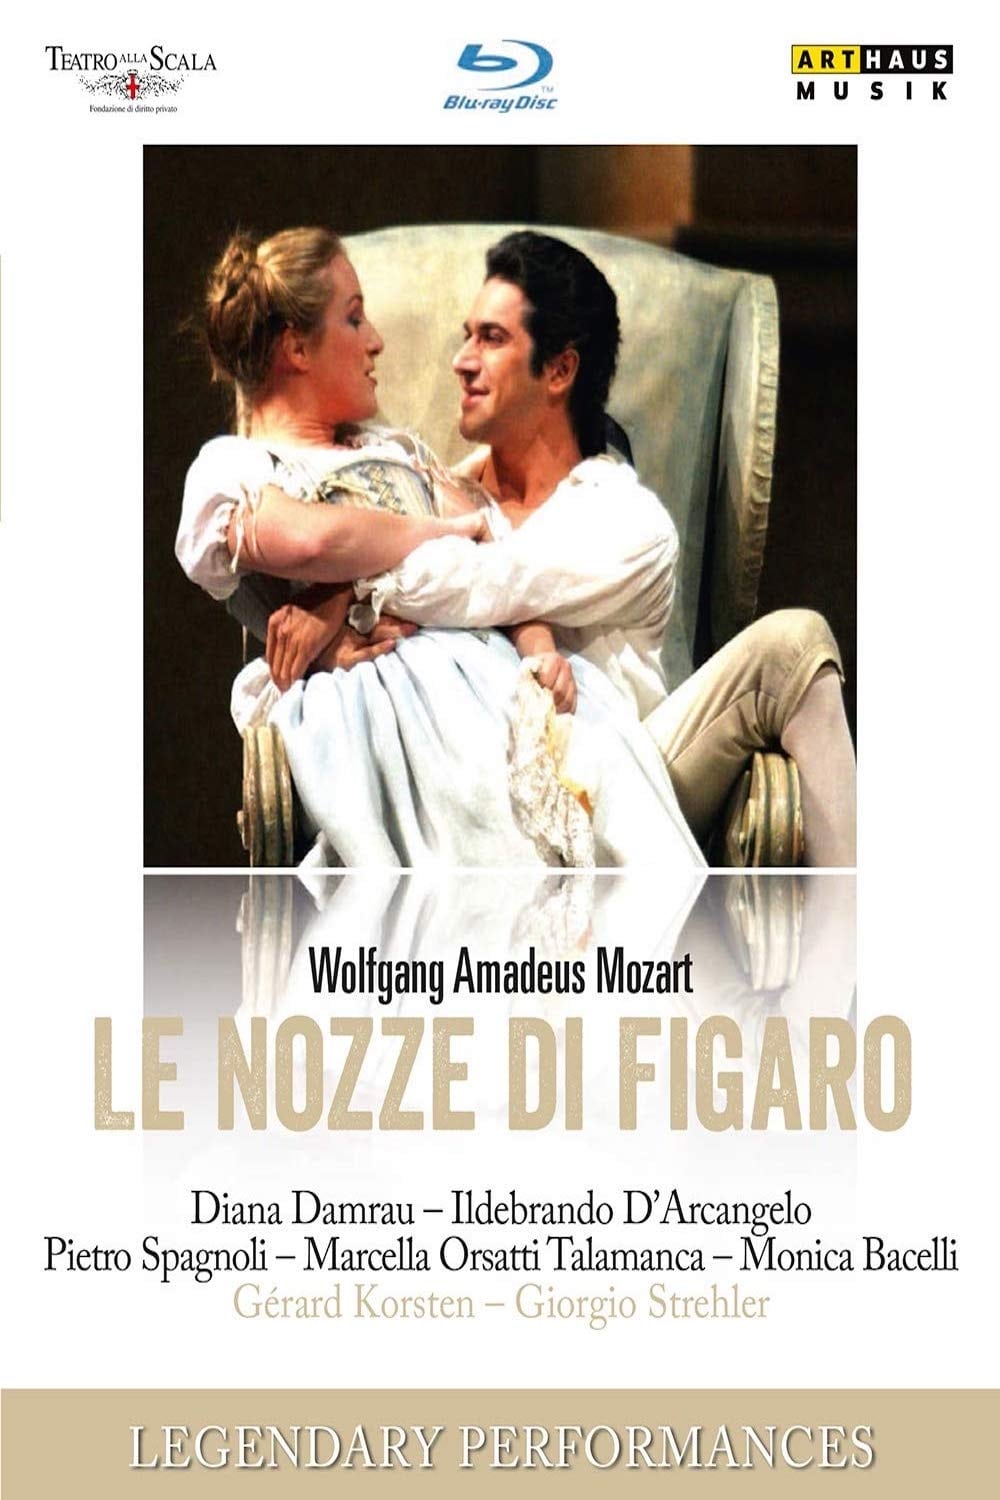 The Marriage of Figaro (2006)